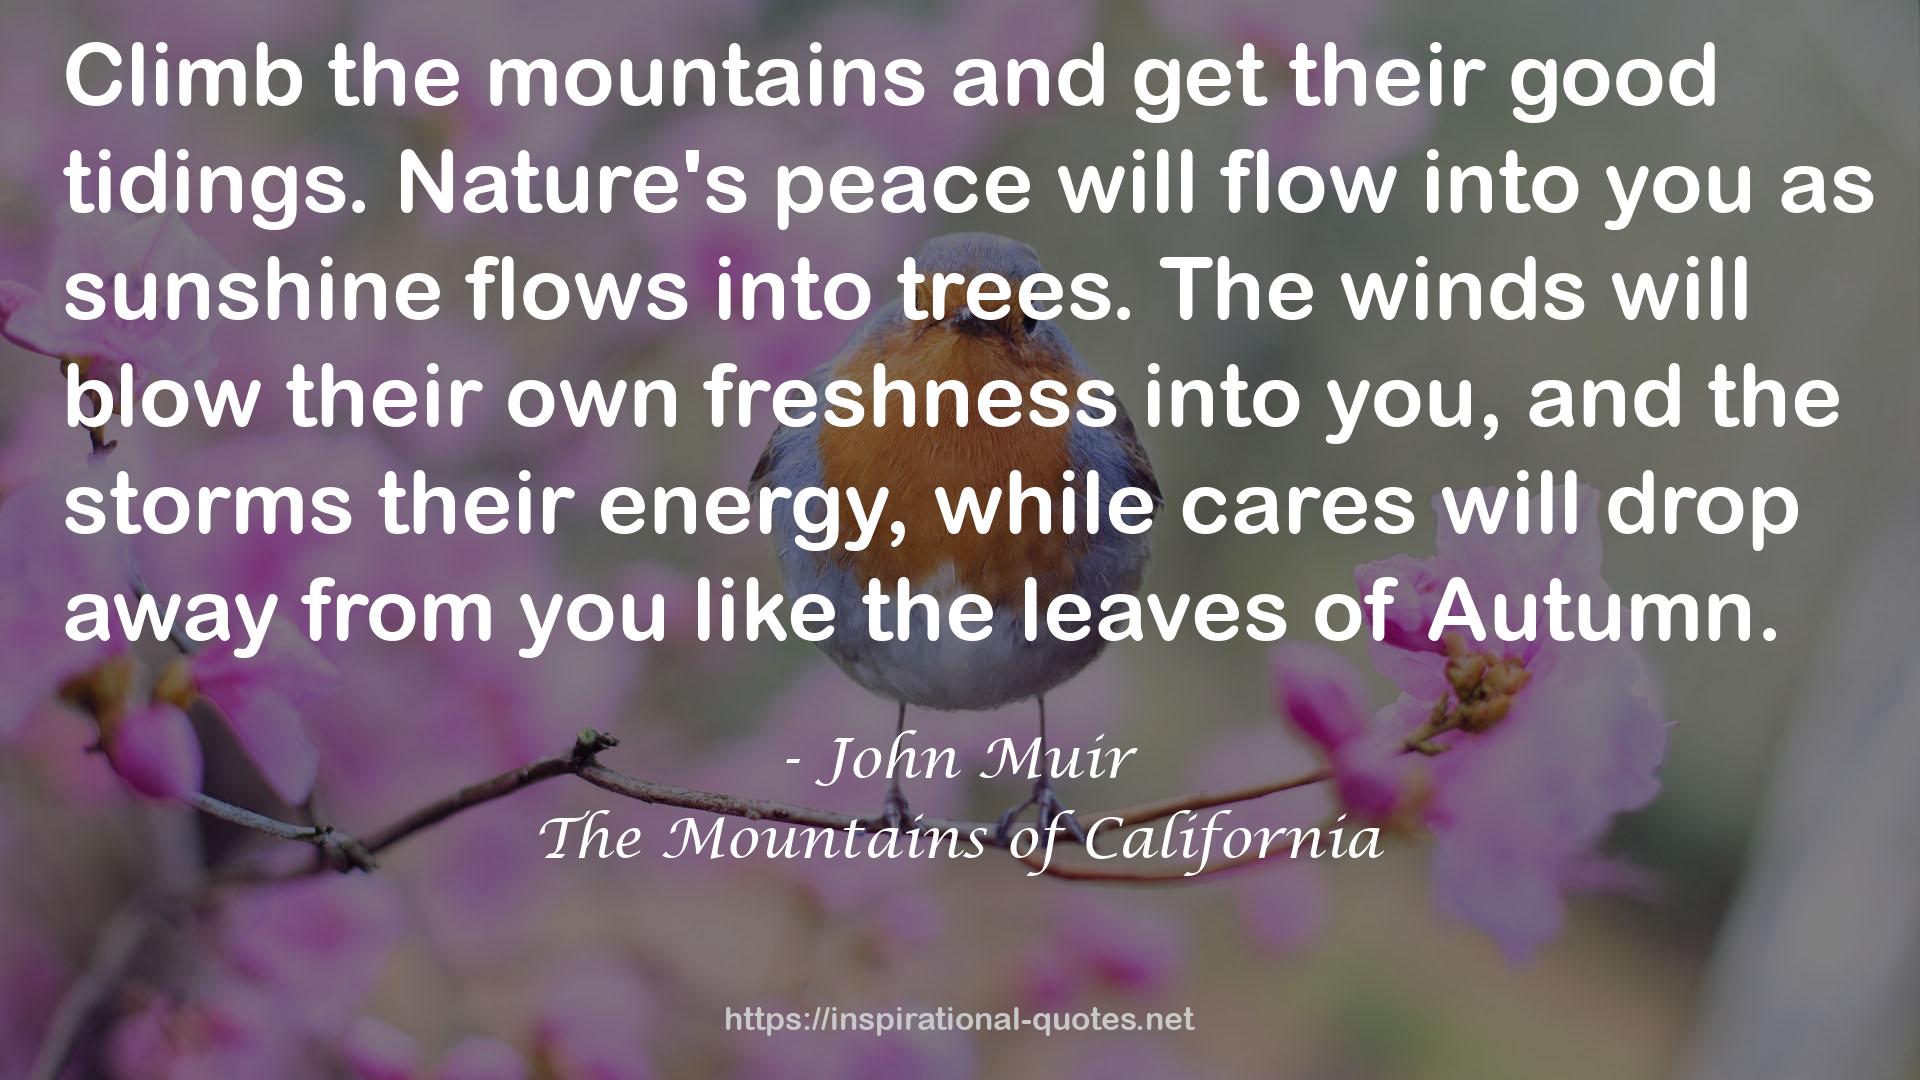 The Mountains of California QUOTES